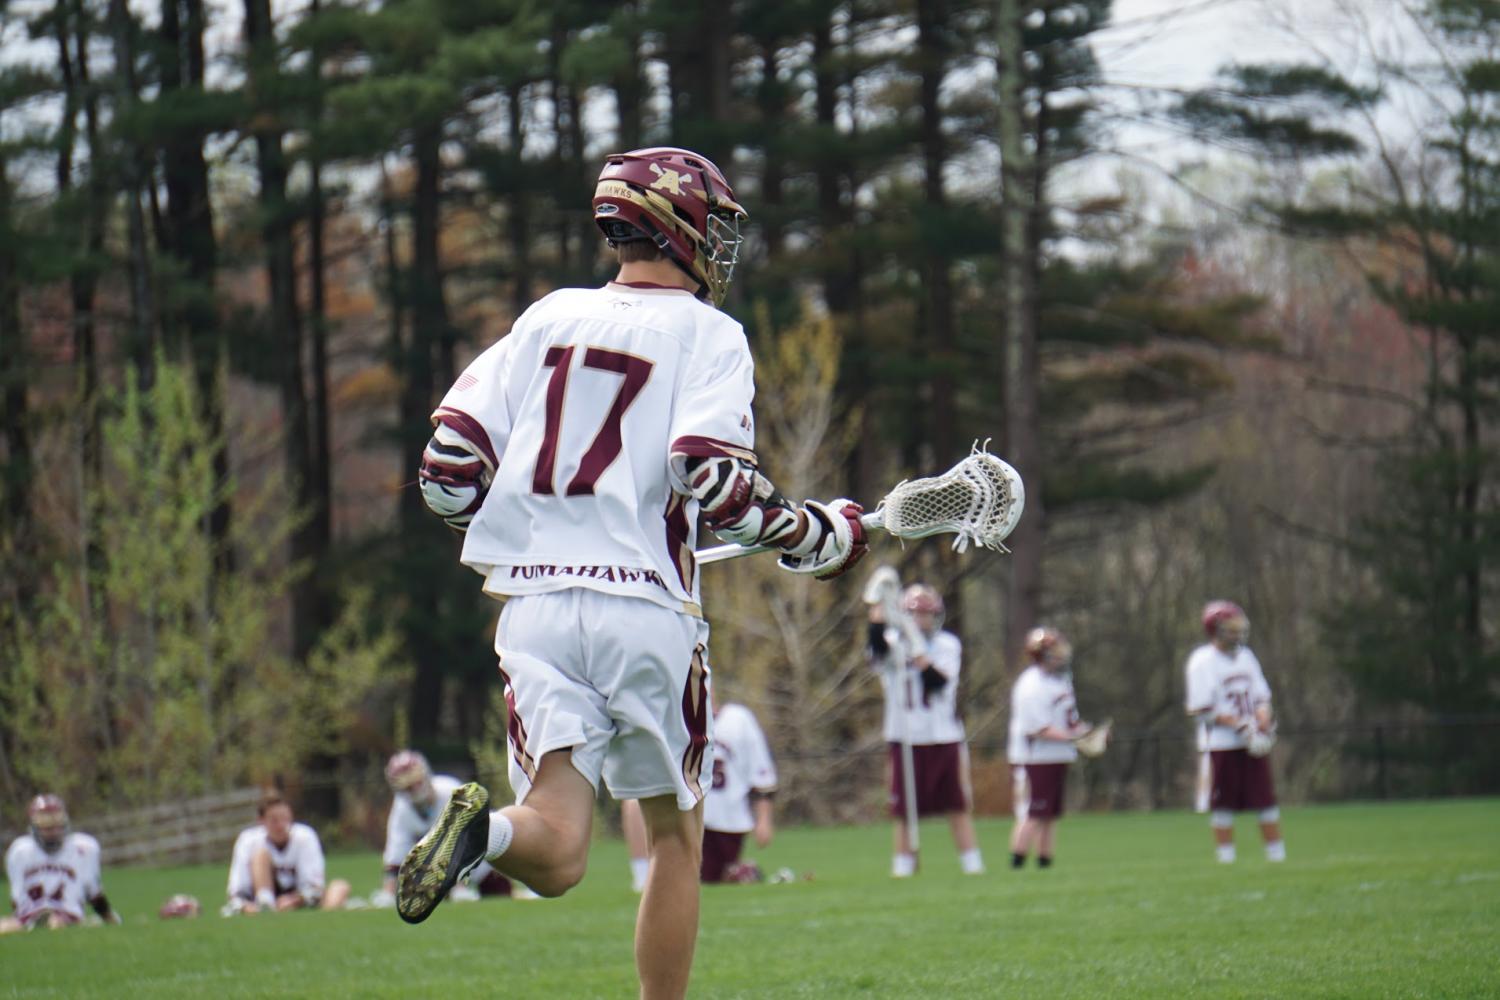 Although starting rough, boys lacrosse has high hopes after the big win against Westborough.